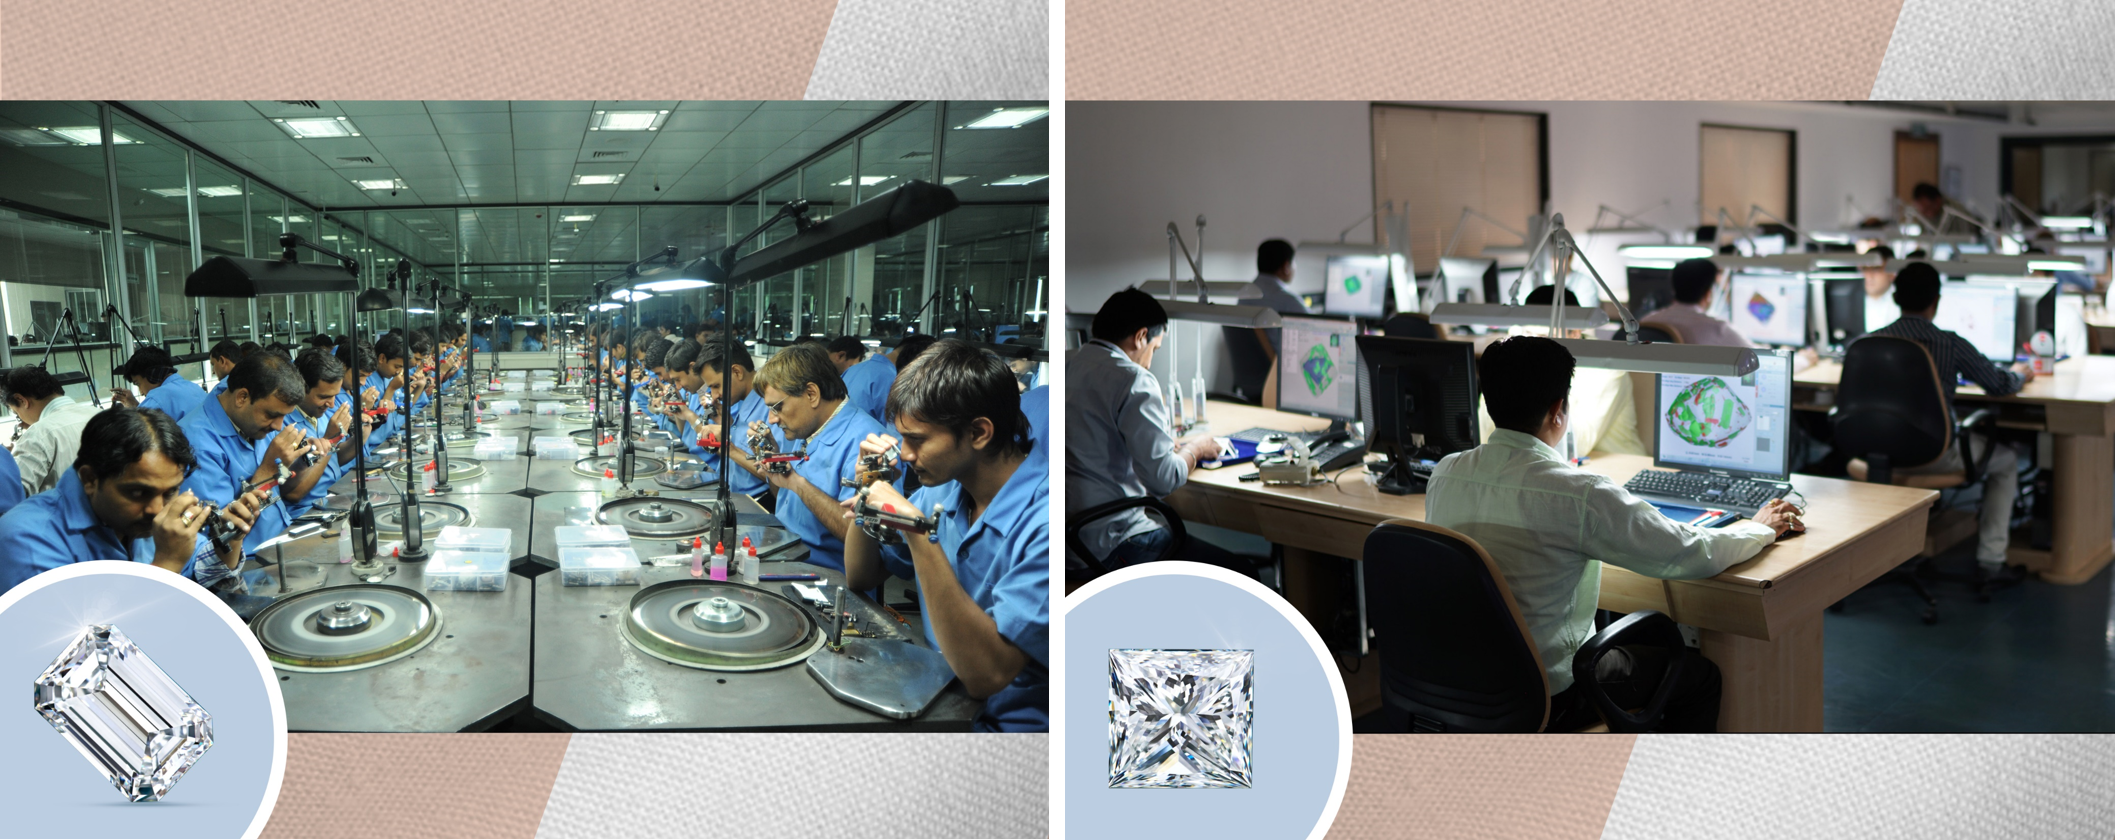 In Surat, diamond manufacturing companies provide their workers with a professional work environment using the latest technological tools of the trade. 